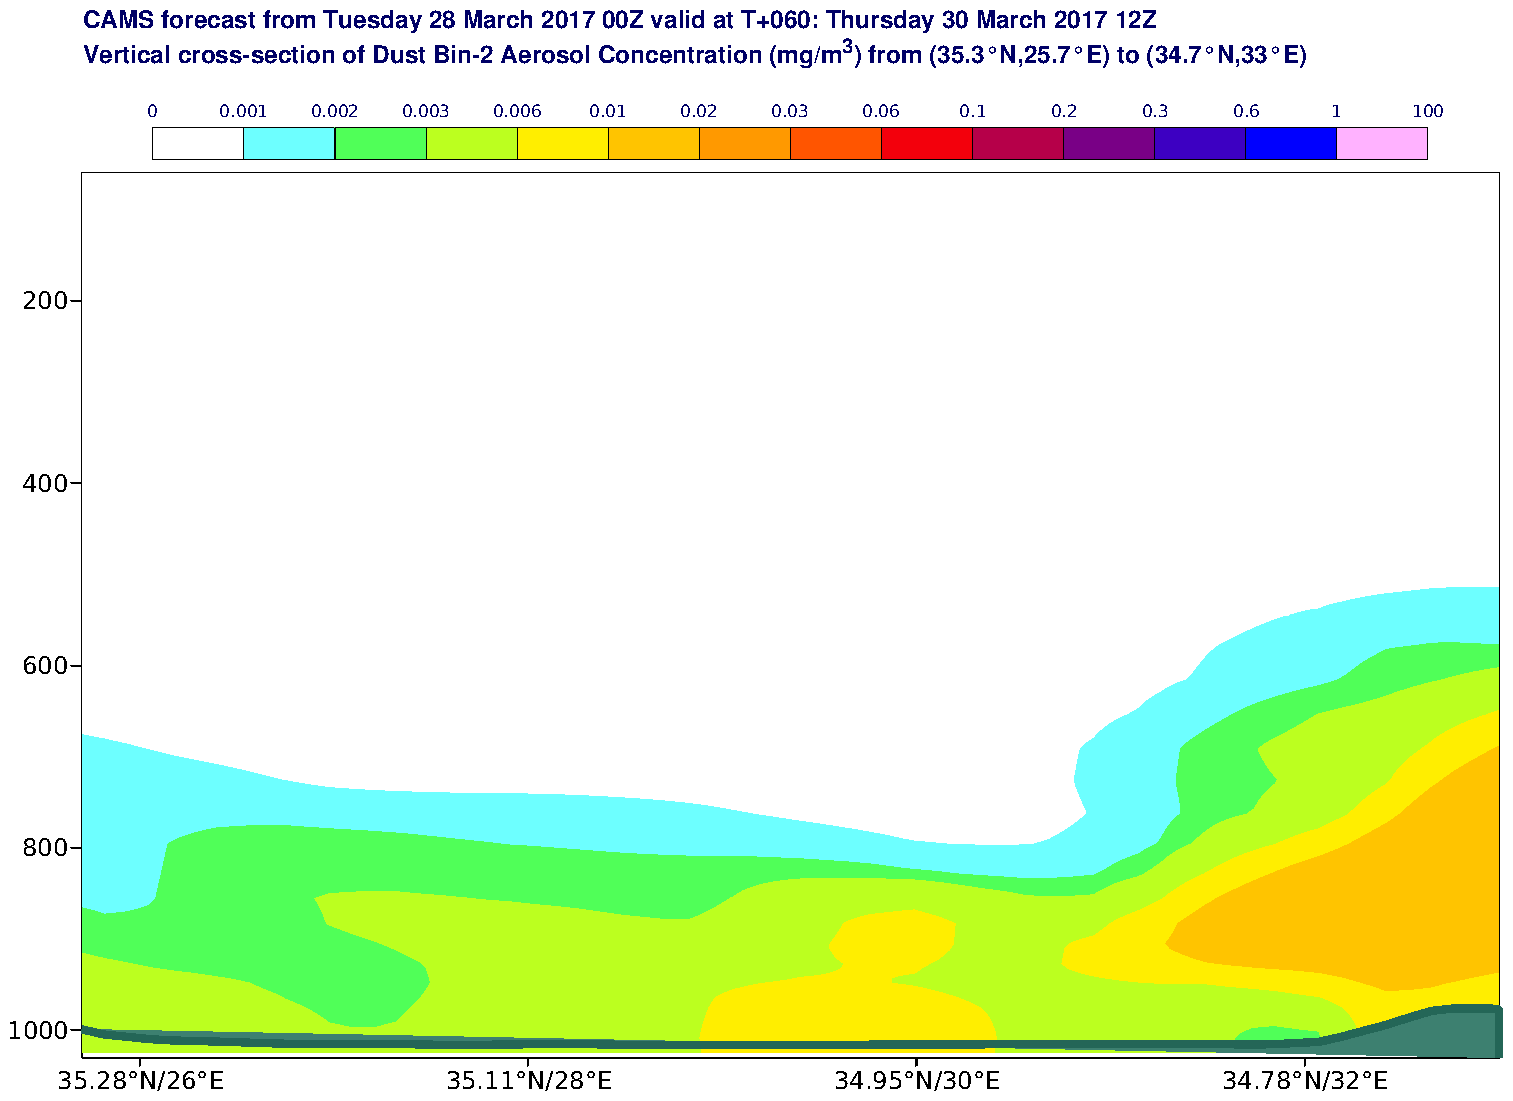 Vertical cross-section of Dust Bin-2 Aerosol Concentration (mg/m3) valid at T60 - 2017-03-30 12:00